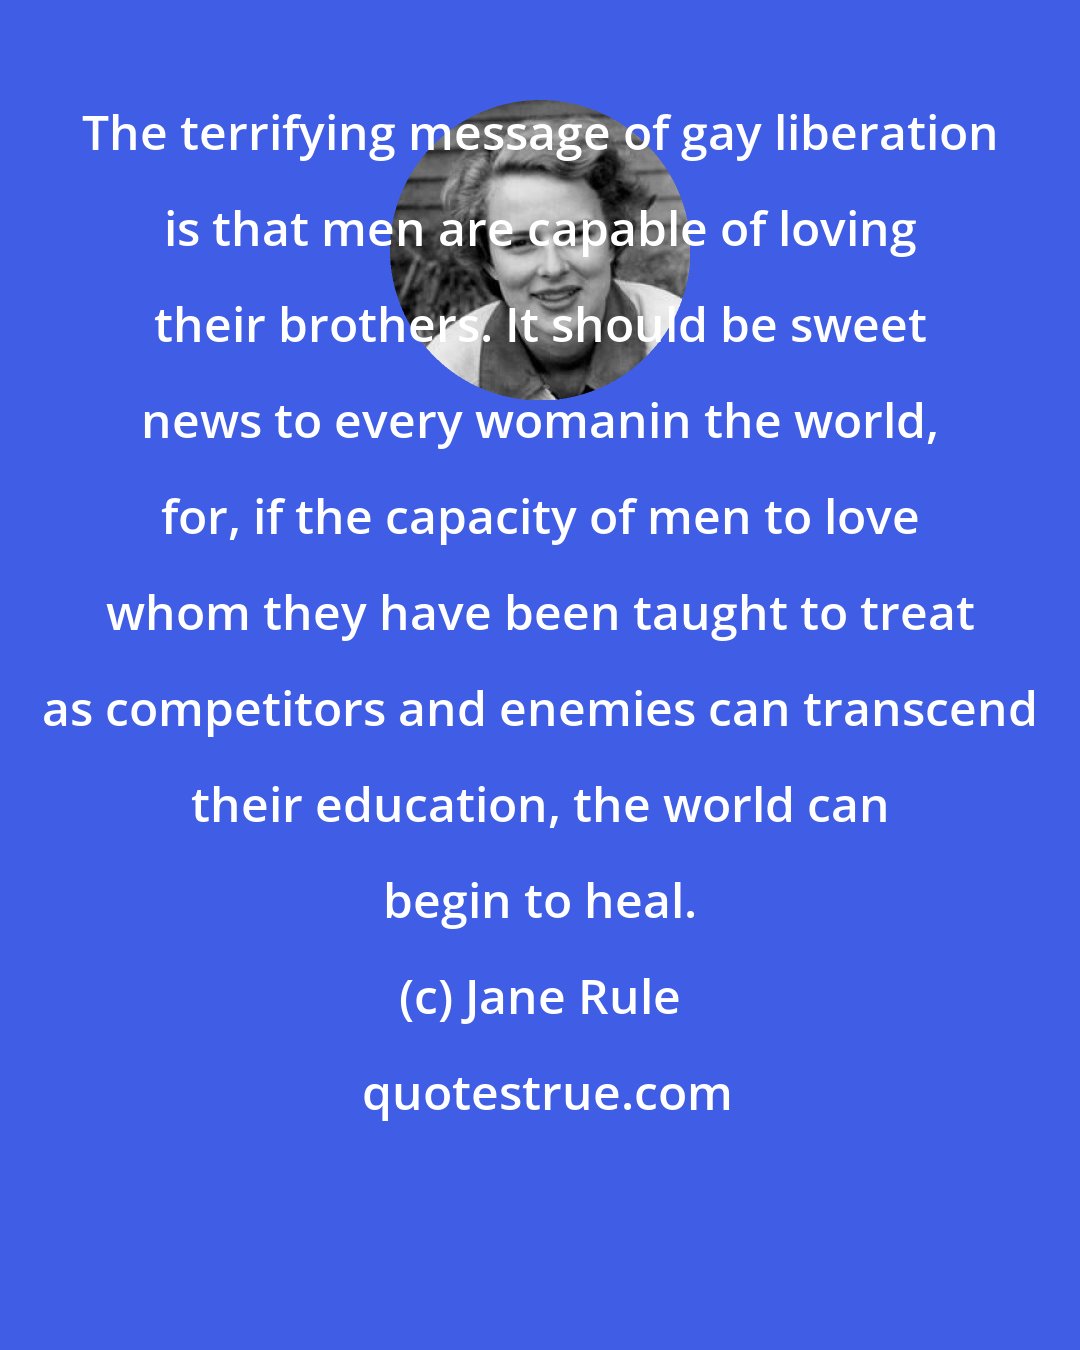 Jane Rule: The terrifying message of gay liberation is that men are capable of loving their brothers. It should be sweet news to every womanin the world, for, if the capacity of men to love whom they have been taught to treat as competitors and enemies can transcend their education, the world can begin to heal.